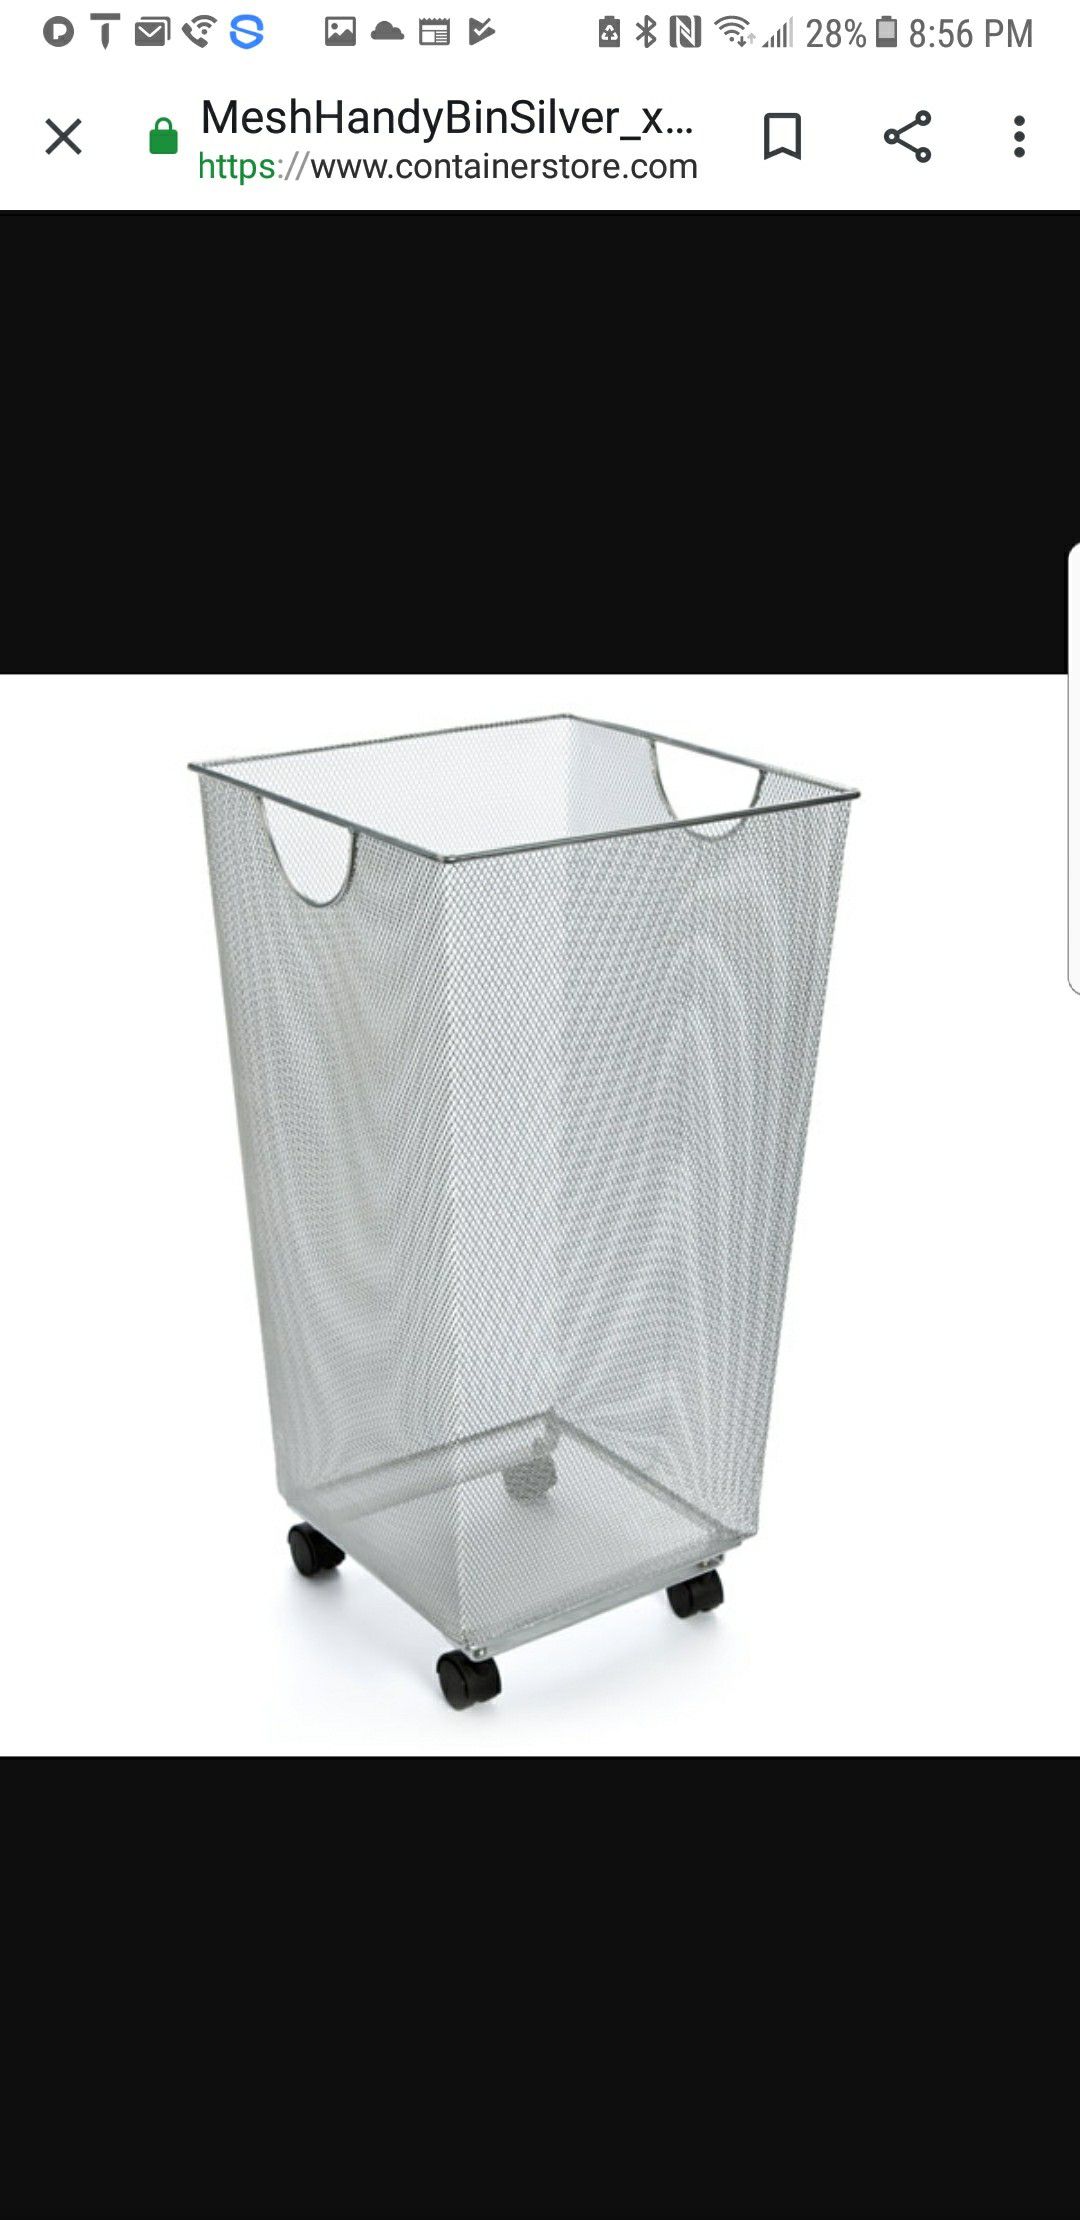 4 tall with wheels and 6 wide extra large without wheels metal mesh bins